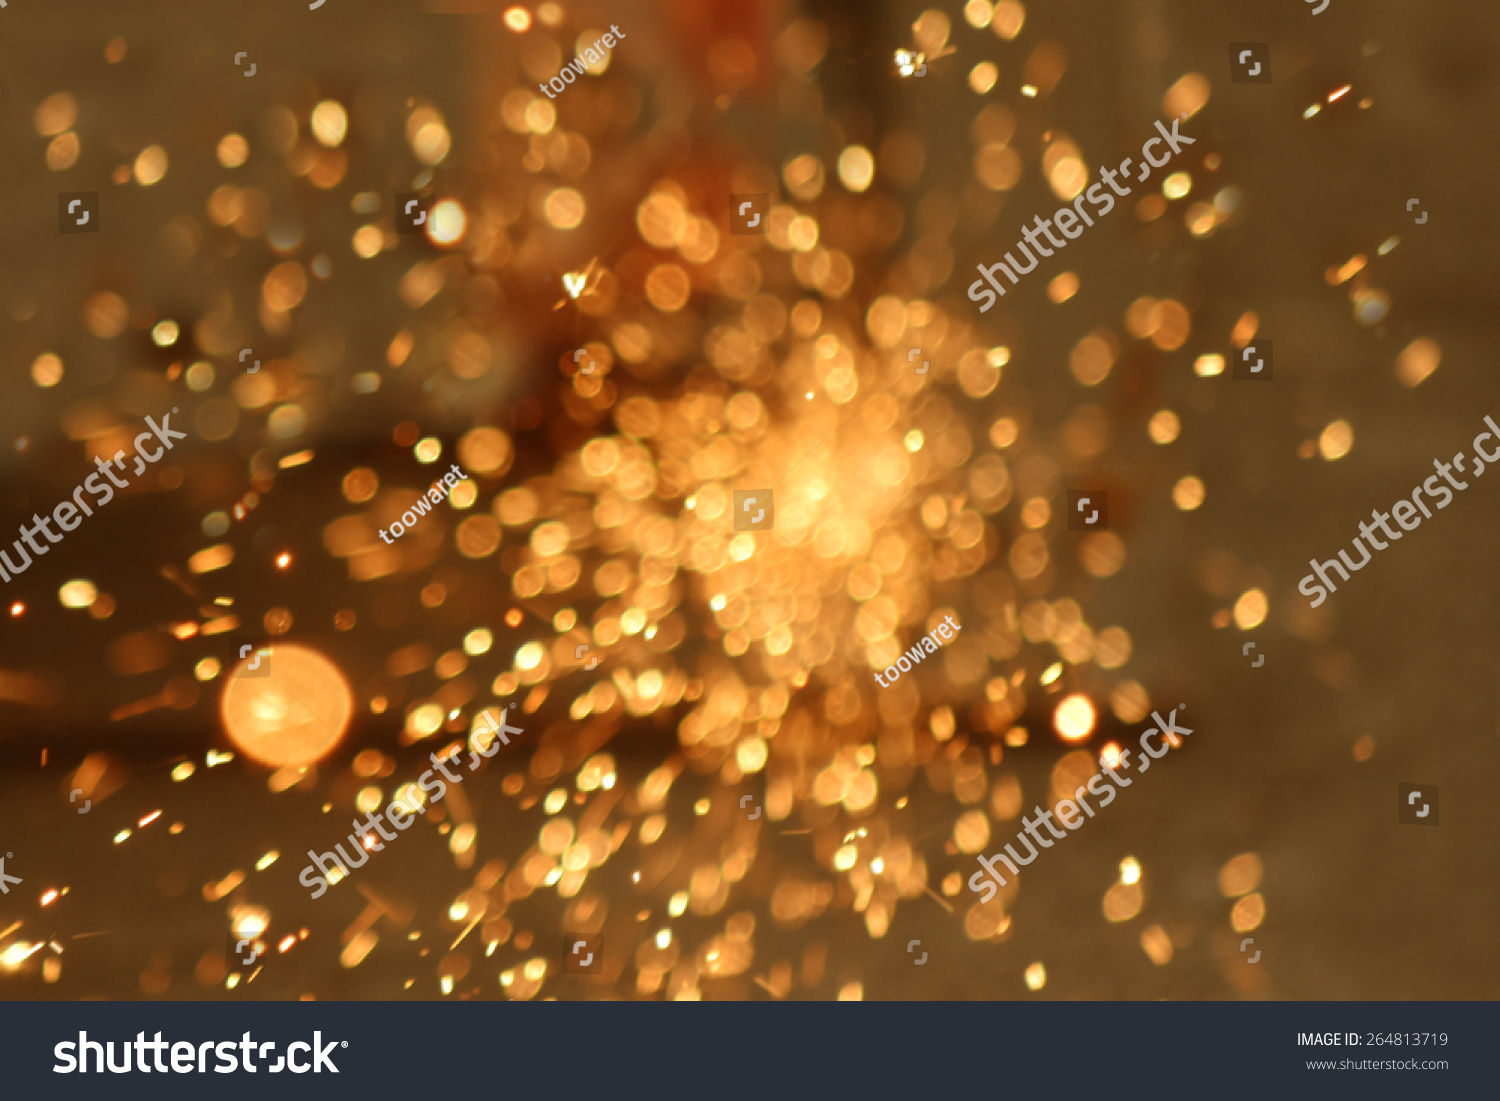 Blurred sparks from grinding steel. #264813719